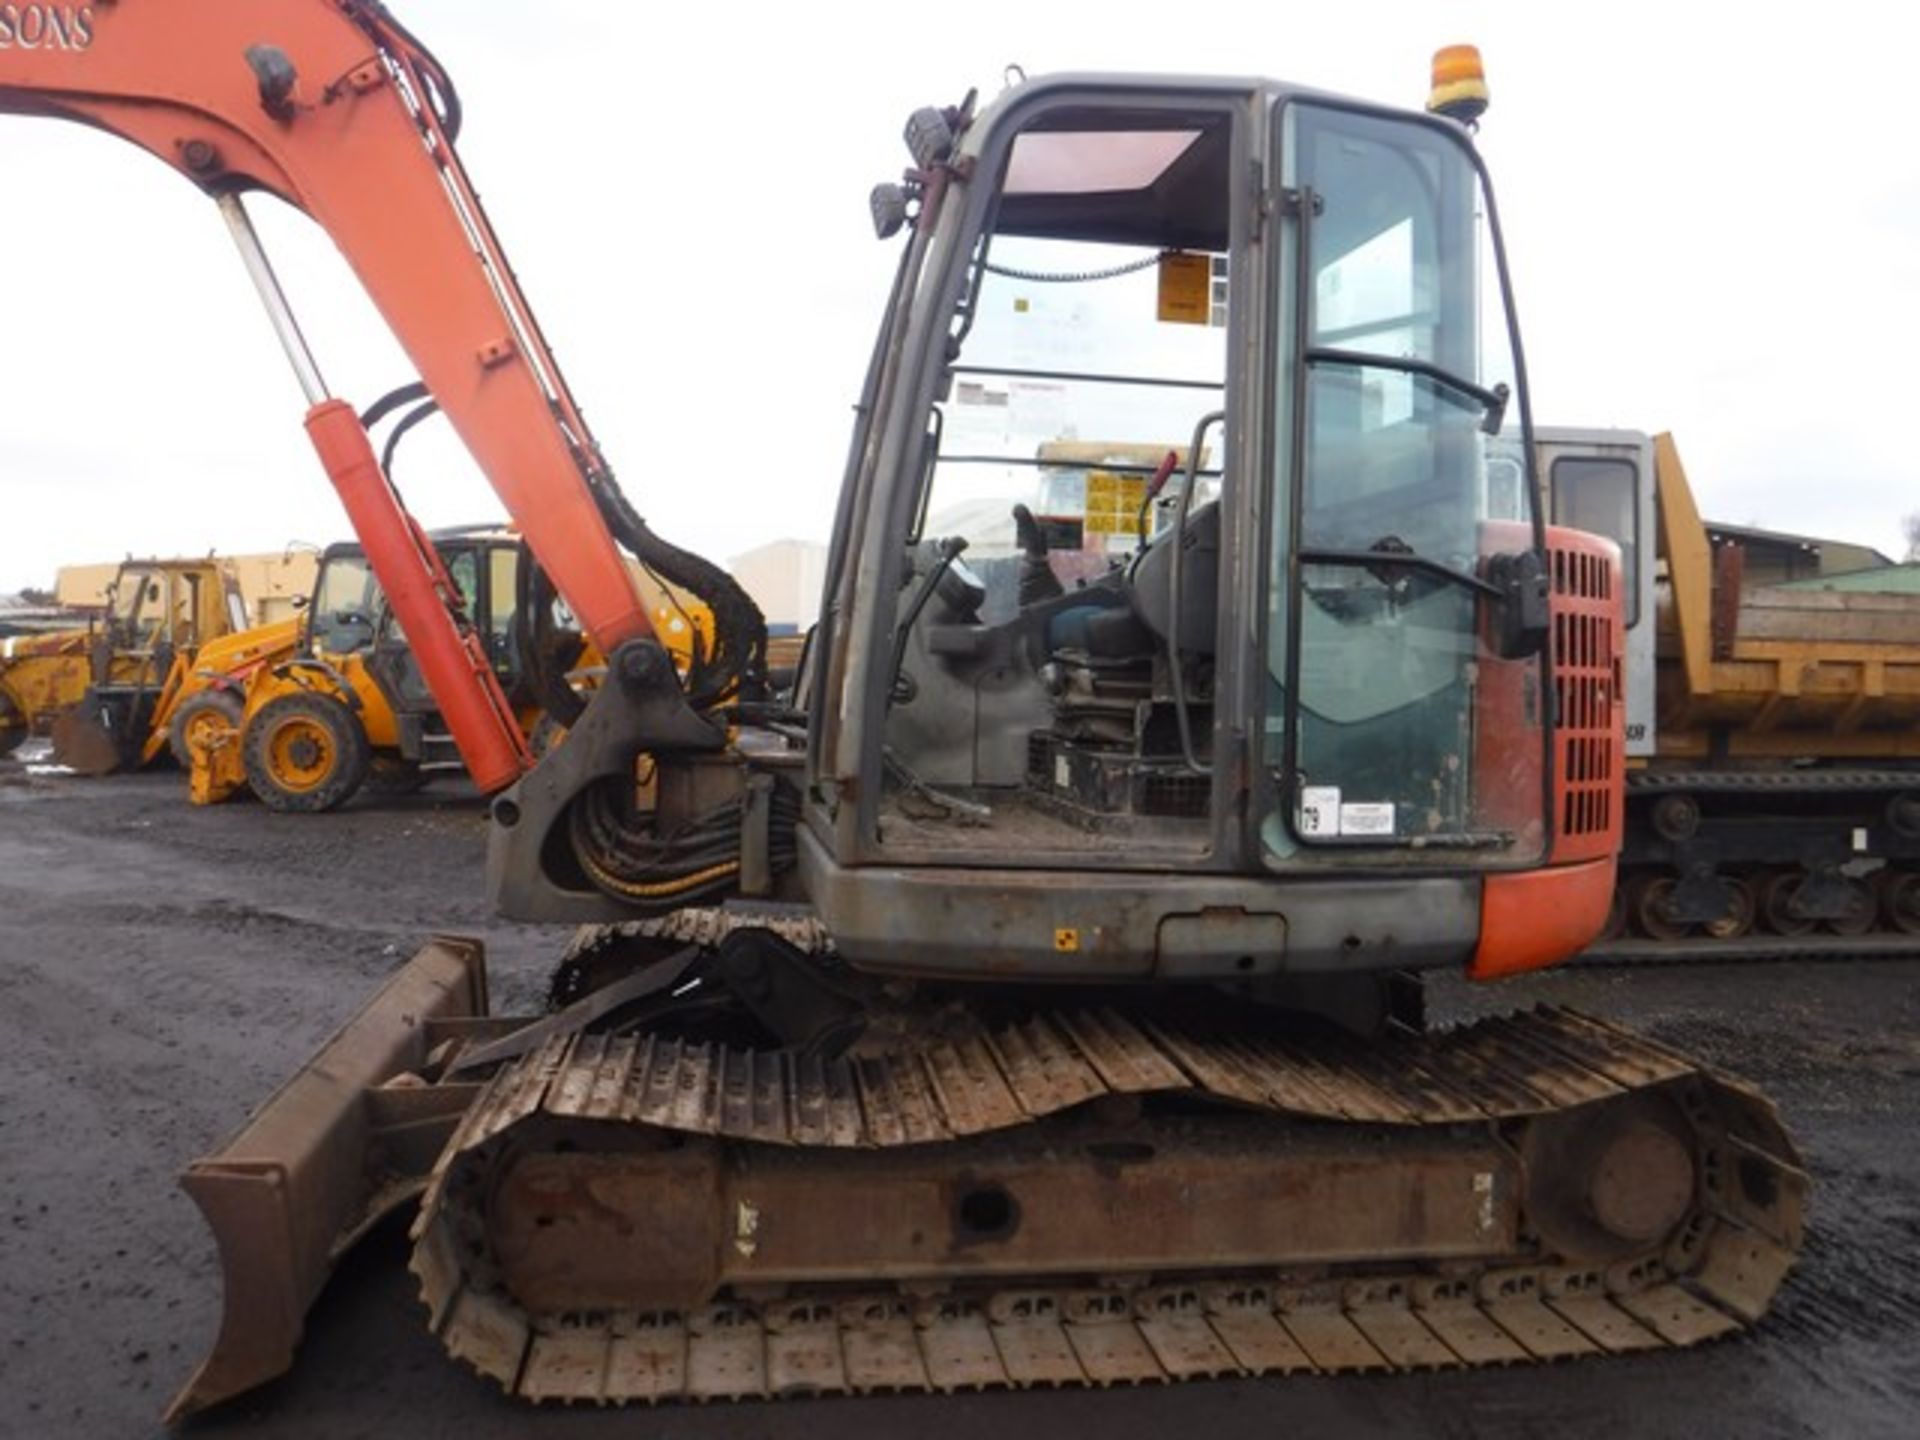 2009 HITACHI 360 EXCAVATOR ZAXIS 85 C/W 3 BUCKETS AND QUICK HITCH 6441HRS (NOT VERIFIED) - Image 24 of 27